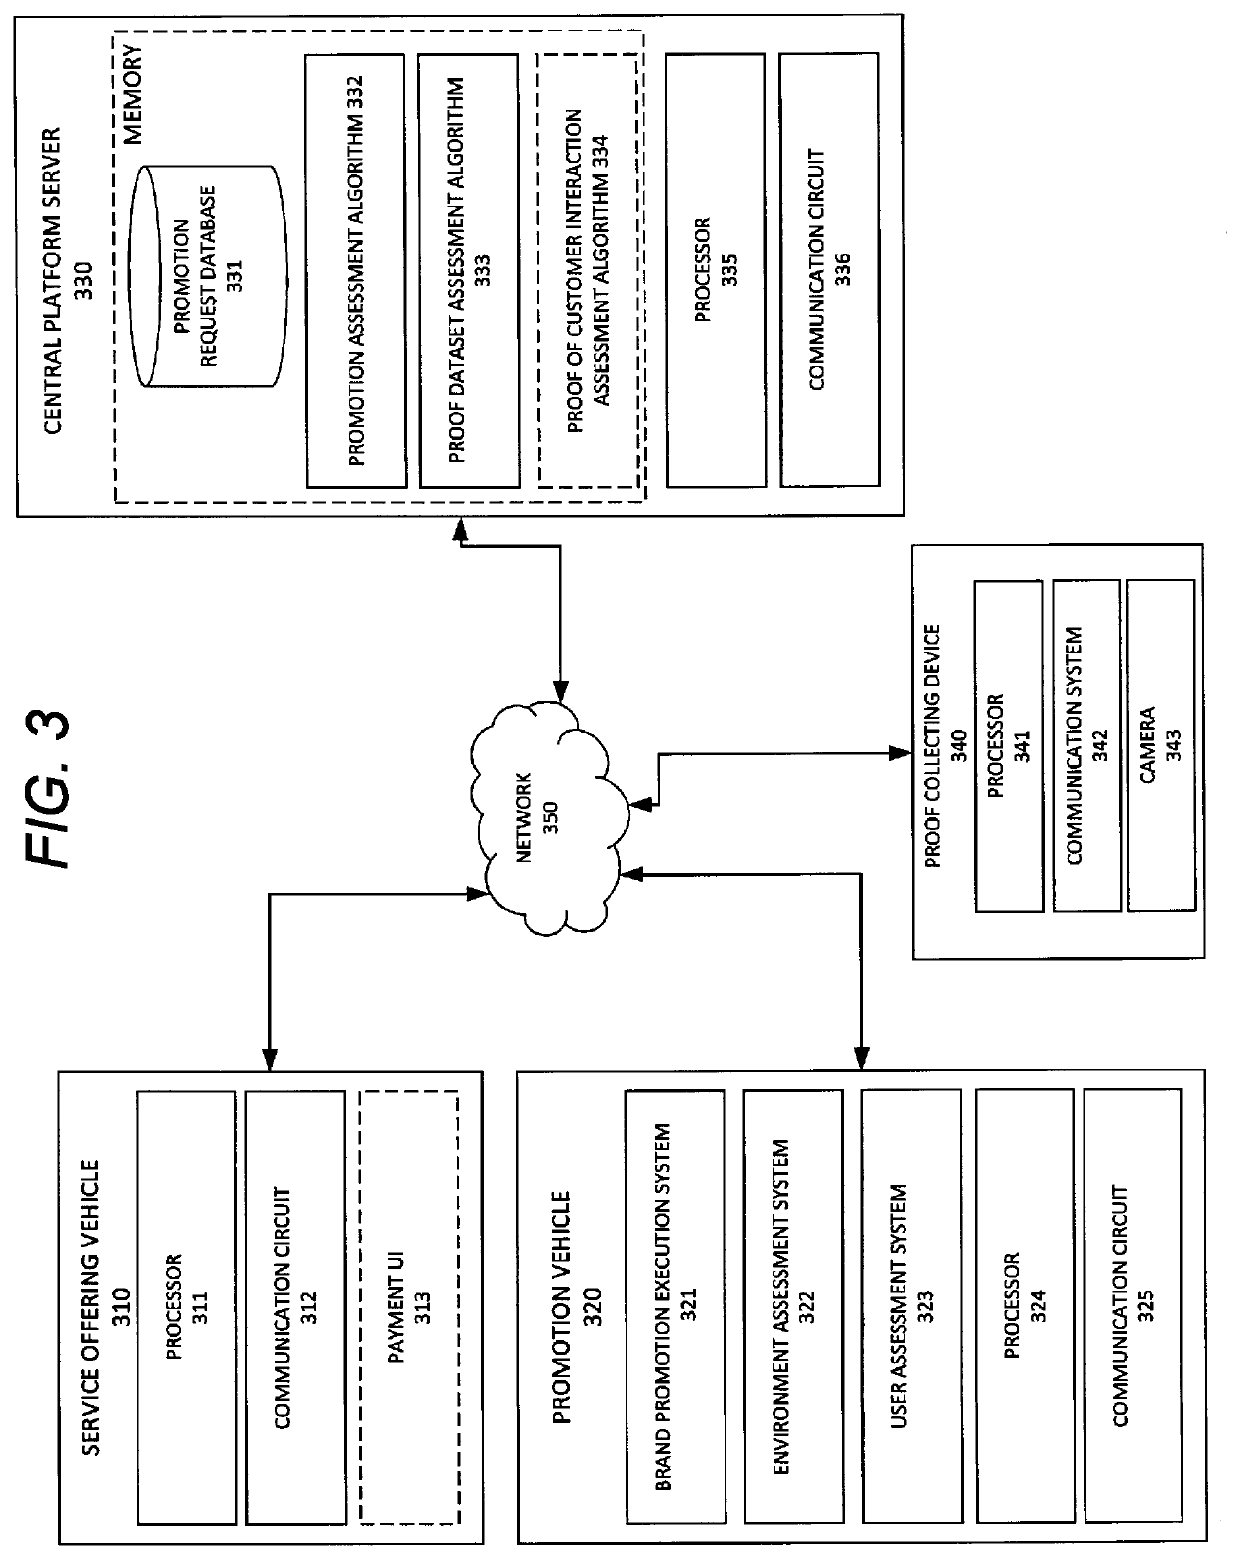 System and method for providing a mobile real-world hyperlink using a vehicle